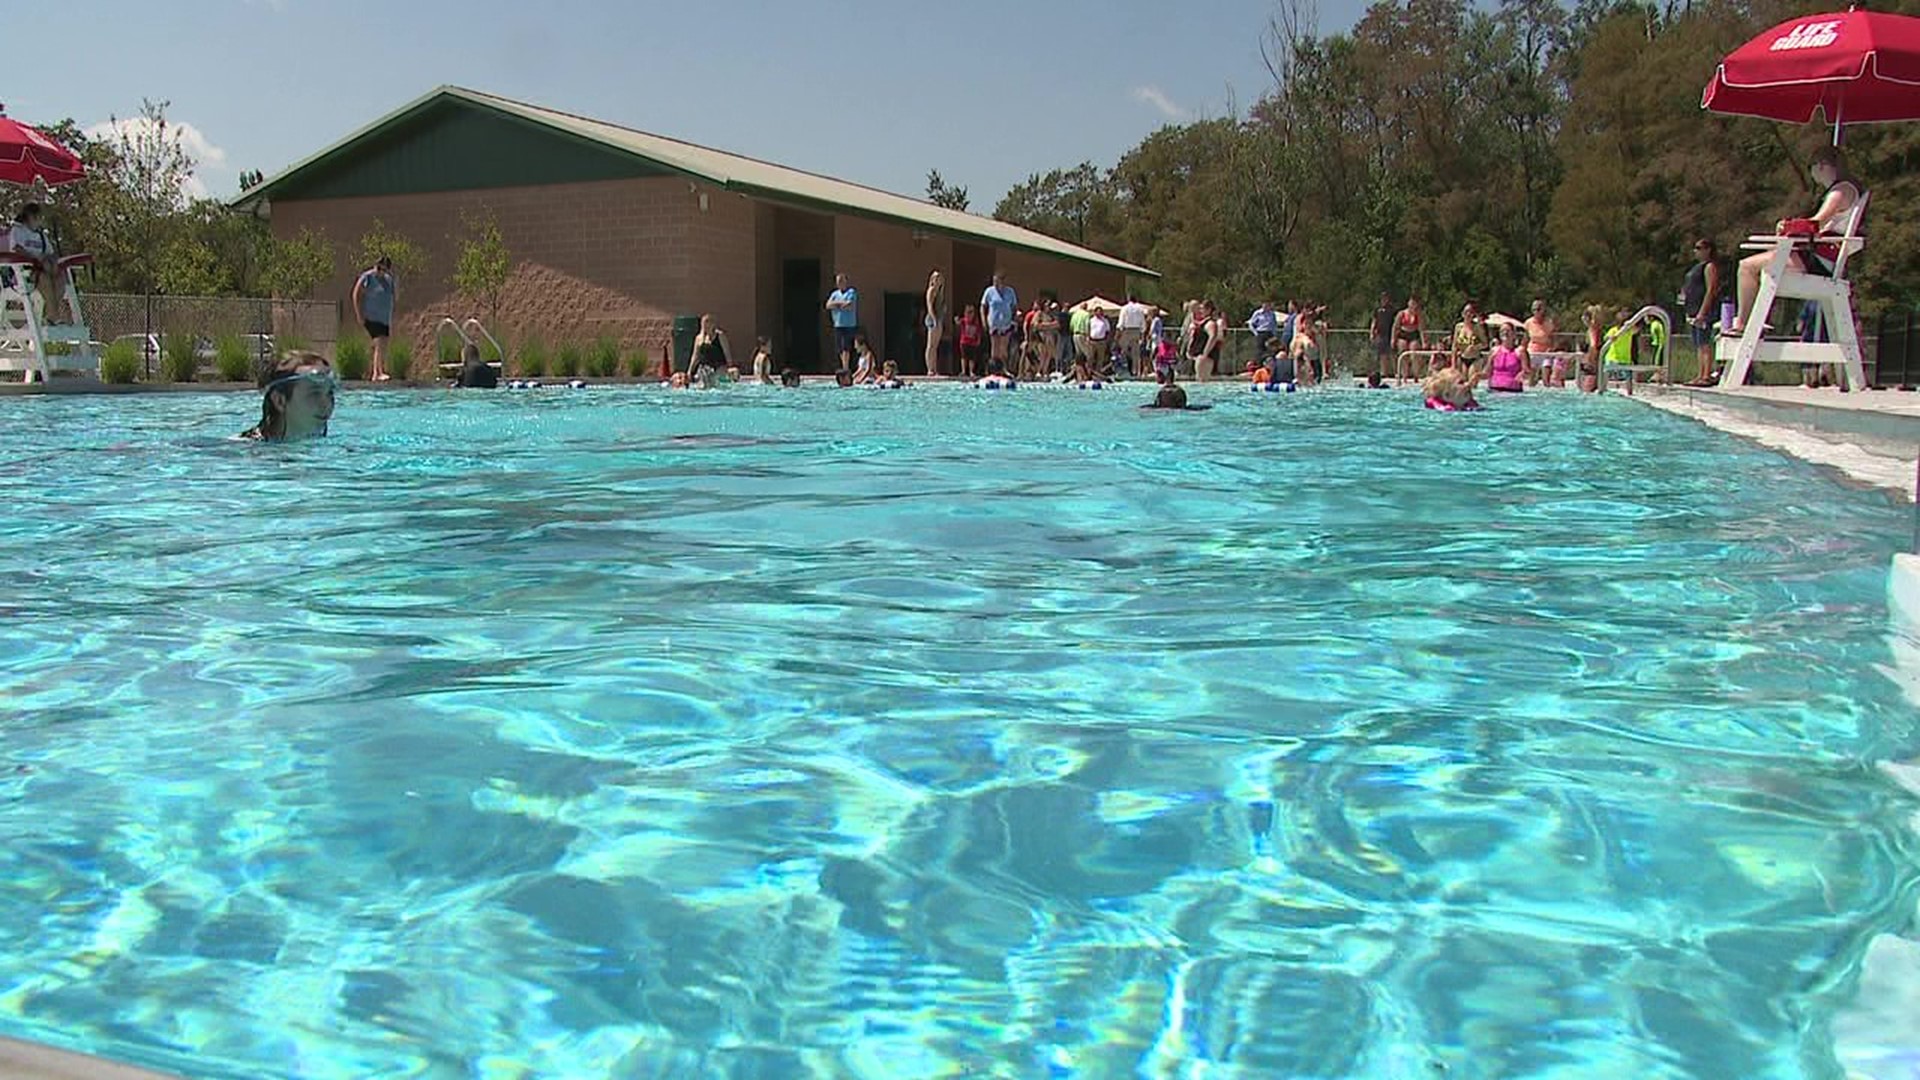 Newswatch 16's Courtney Harrison spoke with families who couldn't wait to get in and cool off.